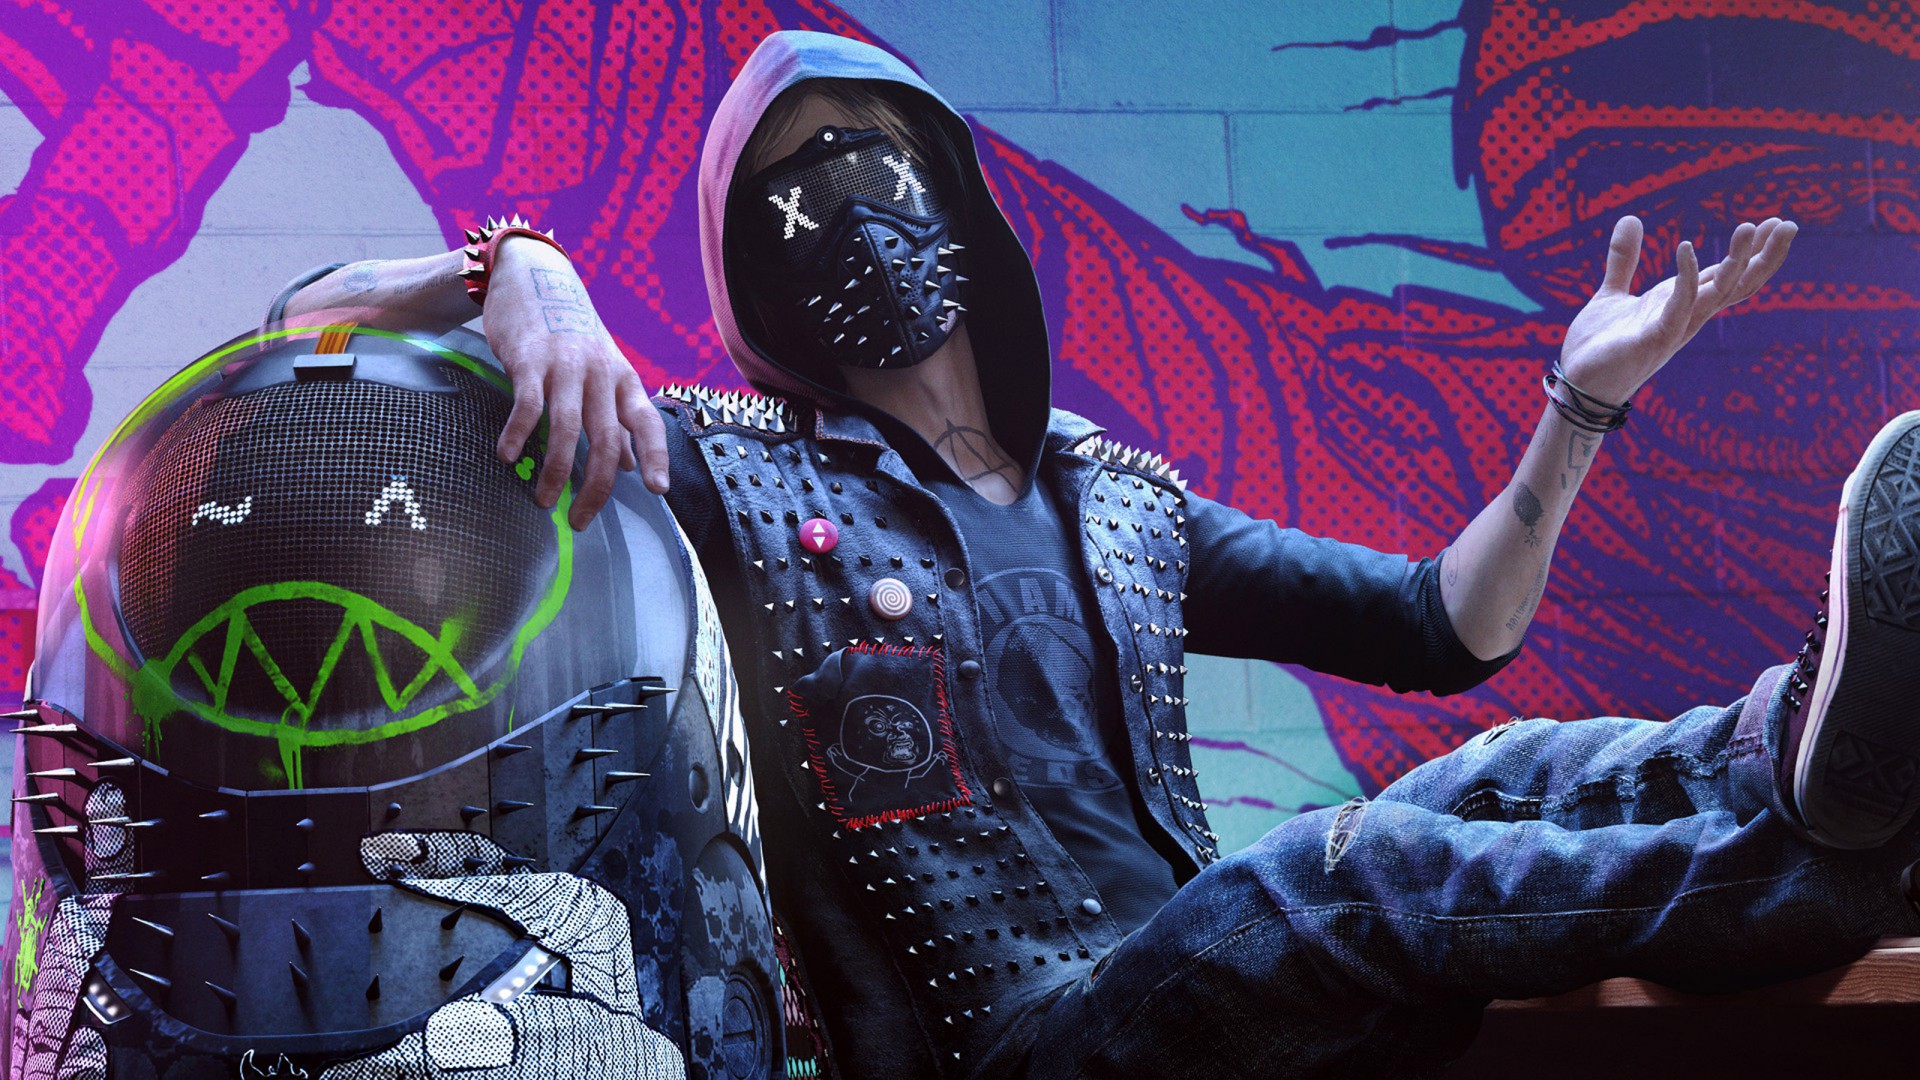 watch dogs 2 download for xbox one